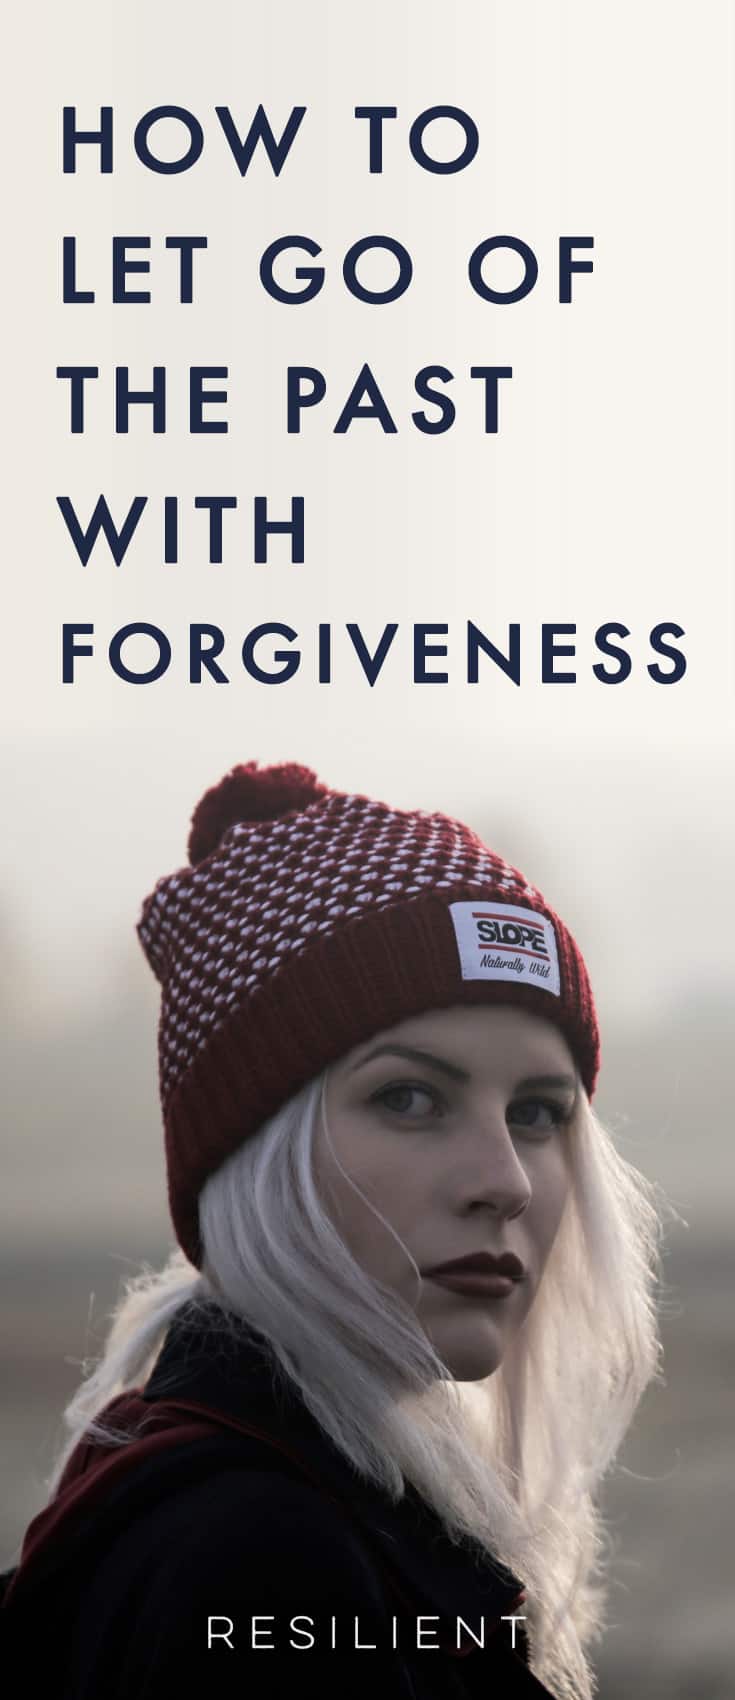 How to Forgive | How to Let Go of the Past with Forgiveness